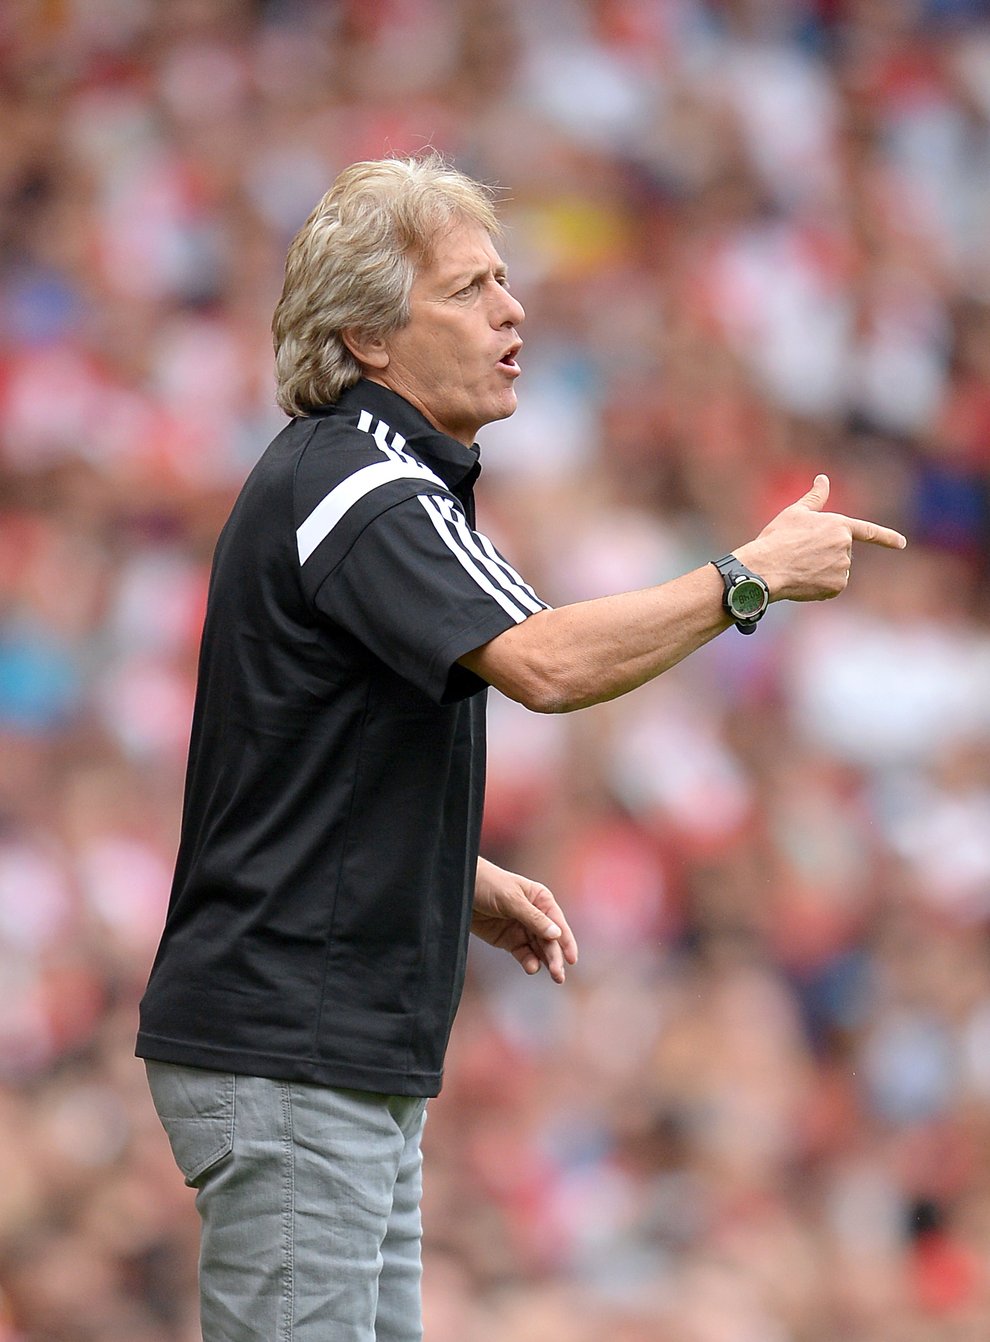 Jorge Jesus has seen his Benfica side struggle for form of late